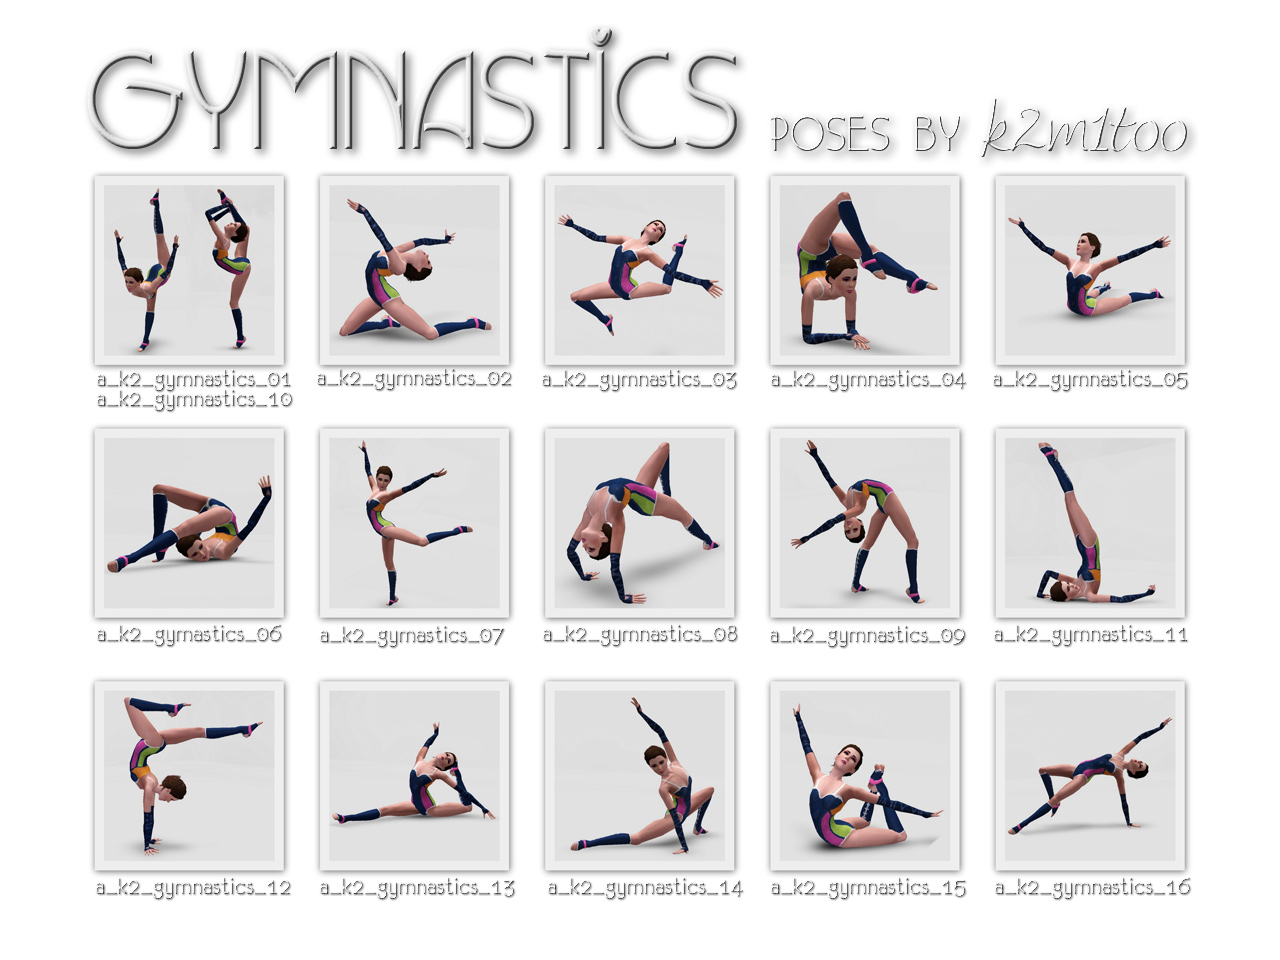 brandy alexandria recommends Gymnastics Poses For Pictures